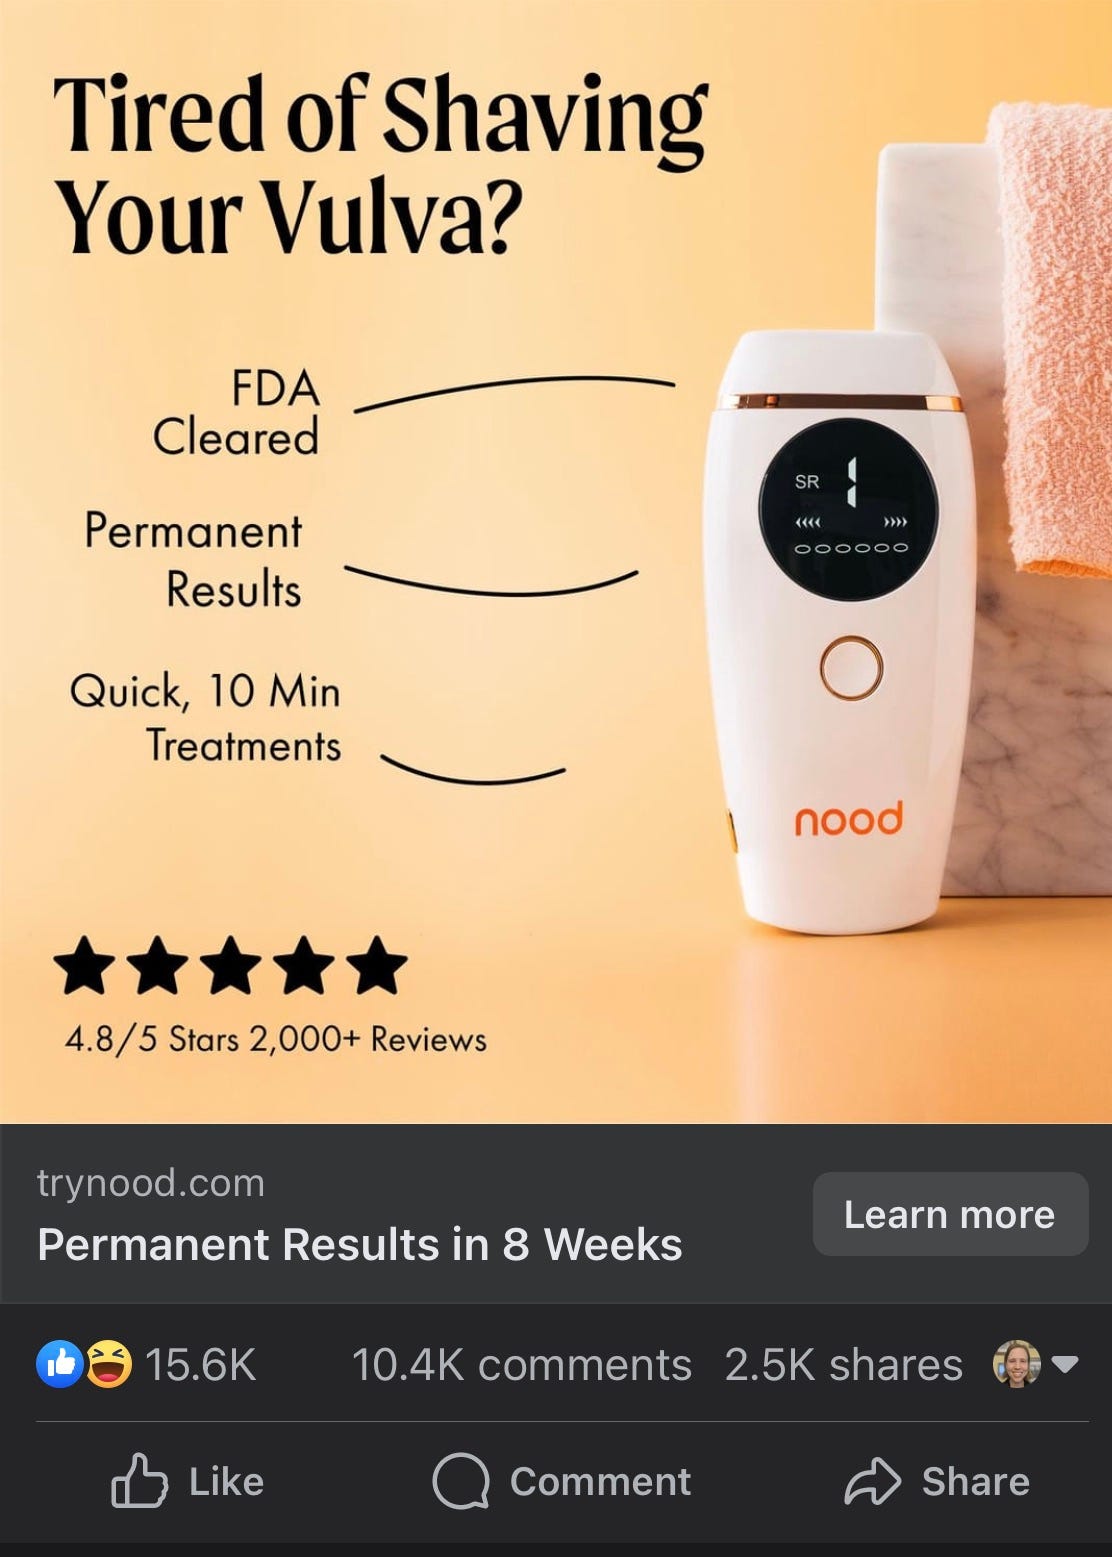 A Facebook ad for a laser hair removal device.